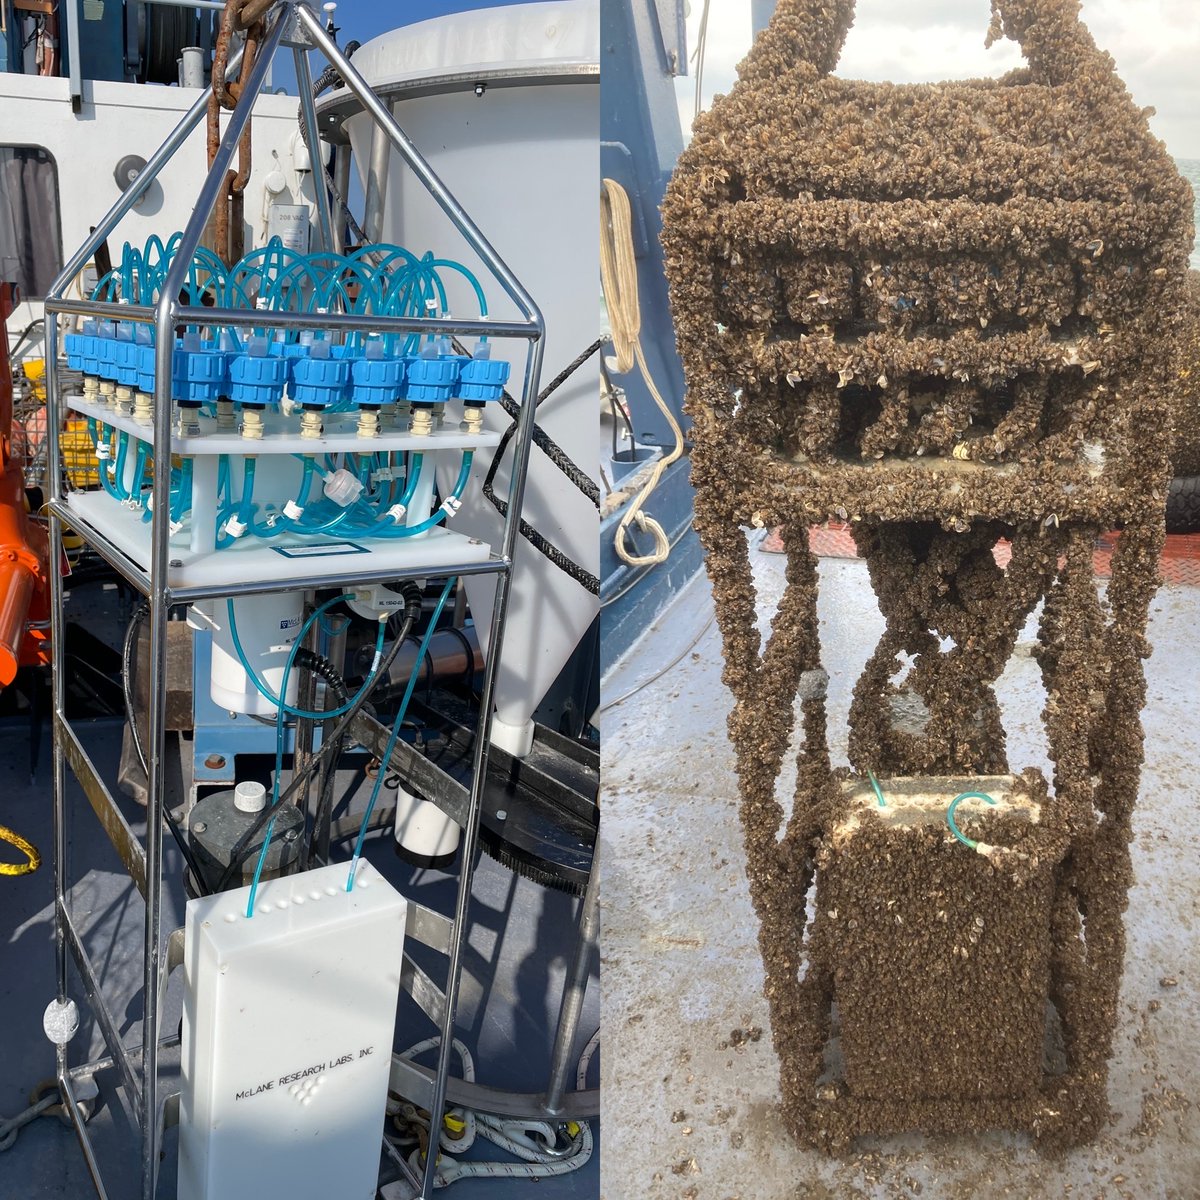 #FieldFriday Before and after a #PPS deployment.  @NewellLab